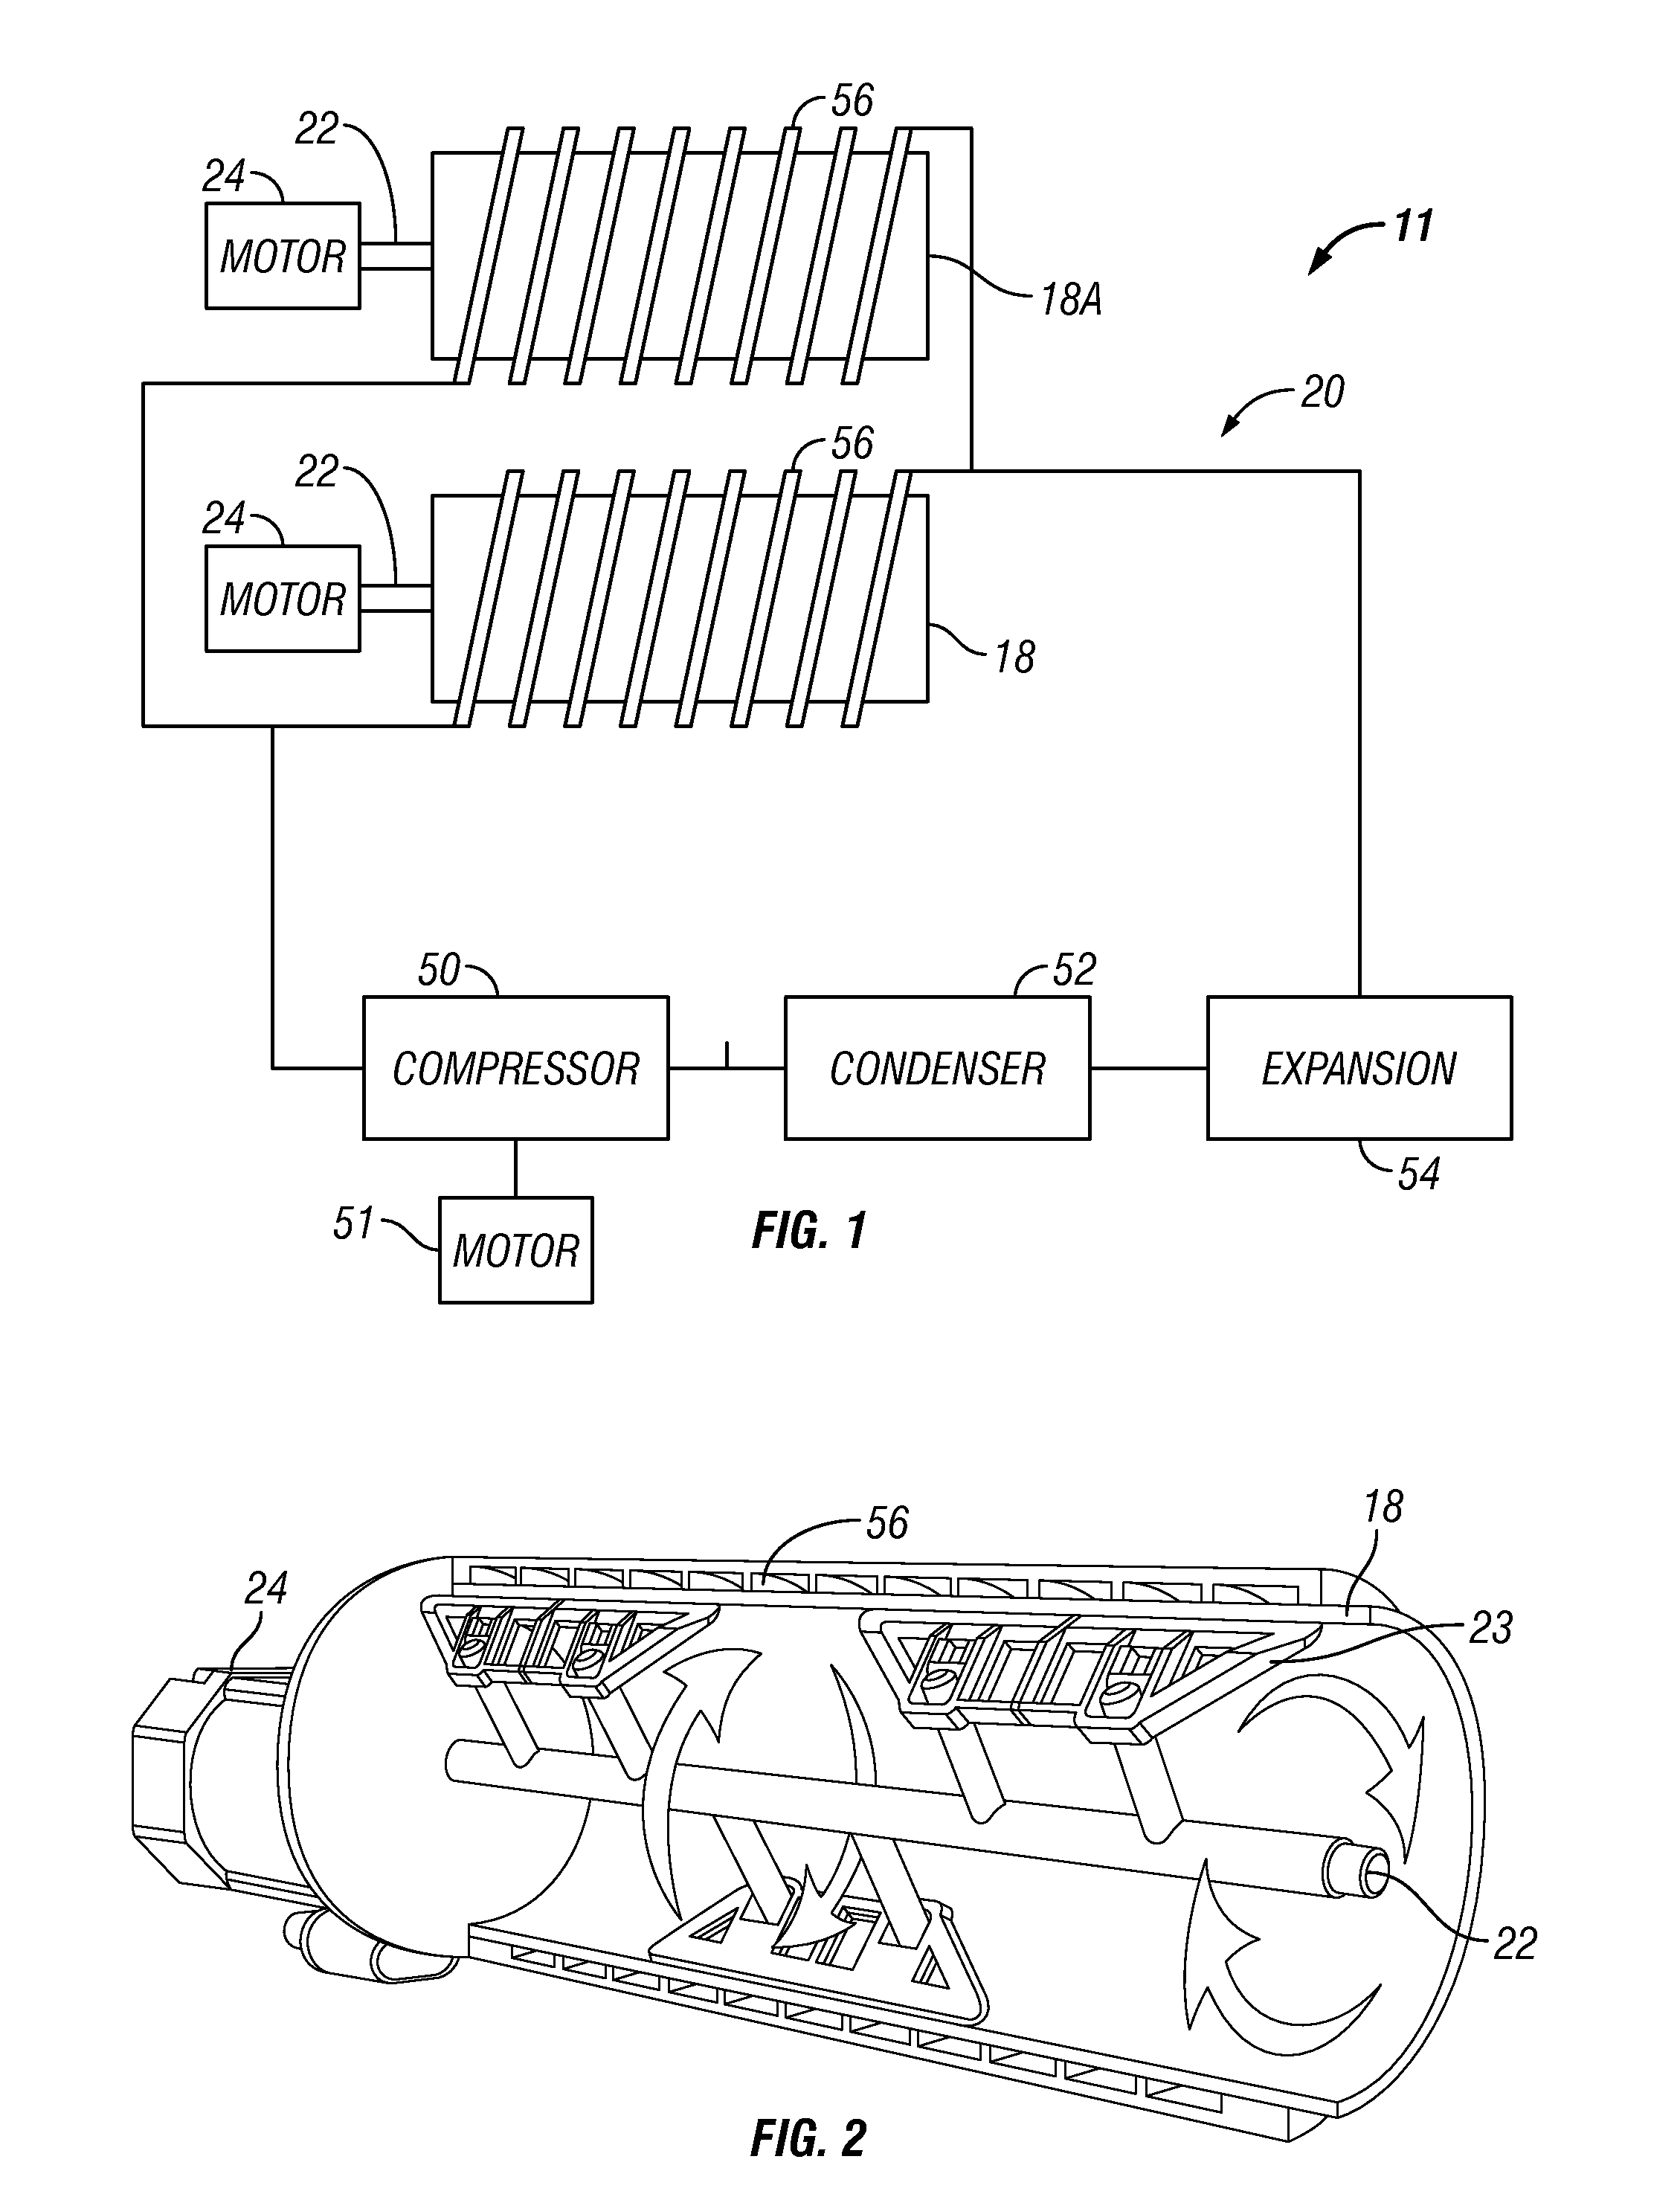 Method and system for reduced energy in a beverage machine